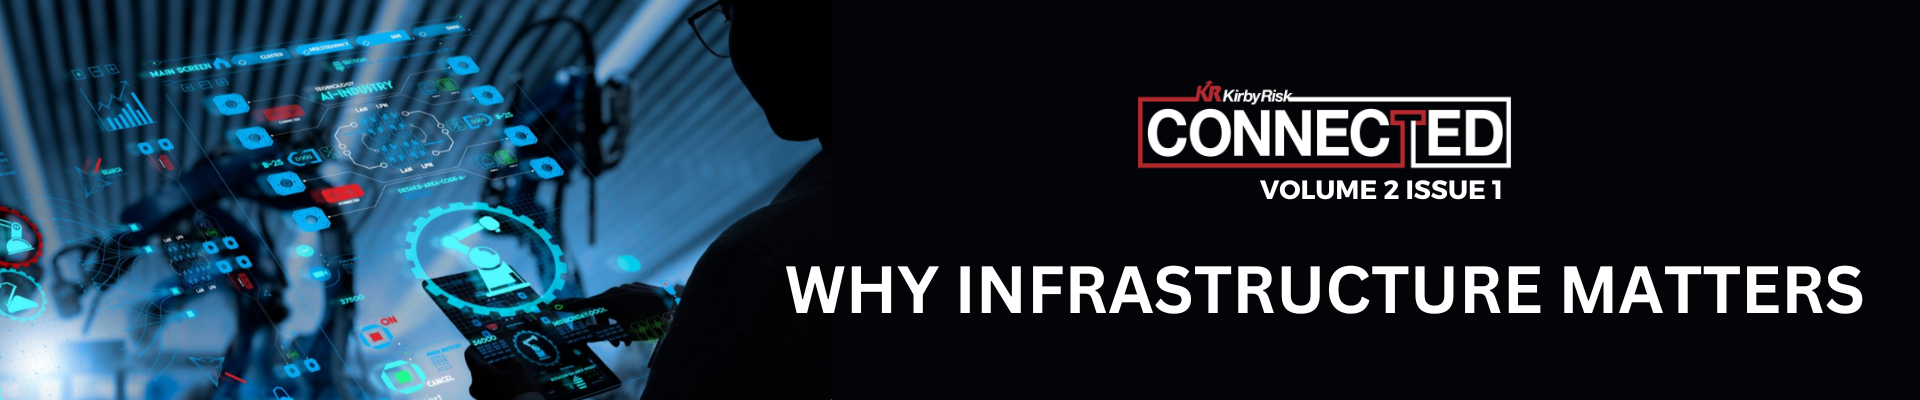 Why Infrastructure Matters 2 Blog Header